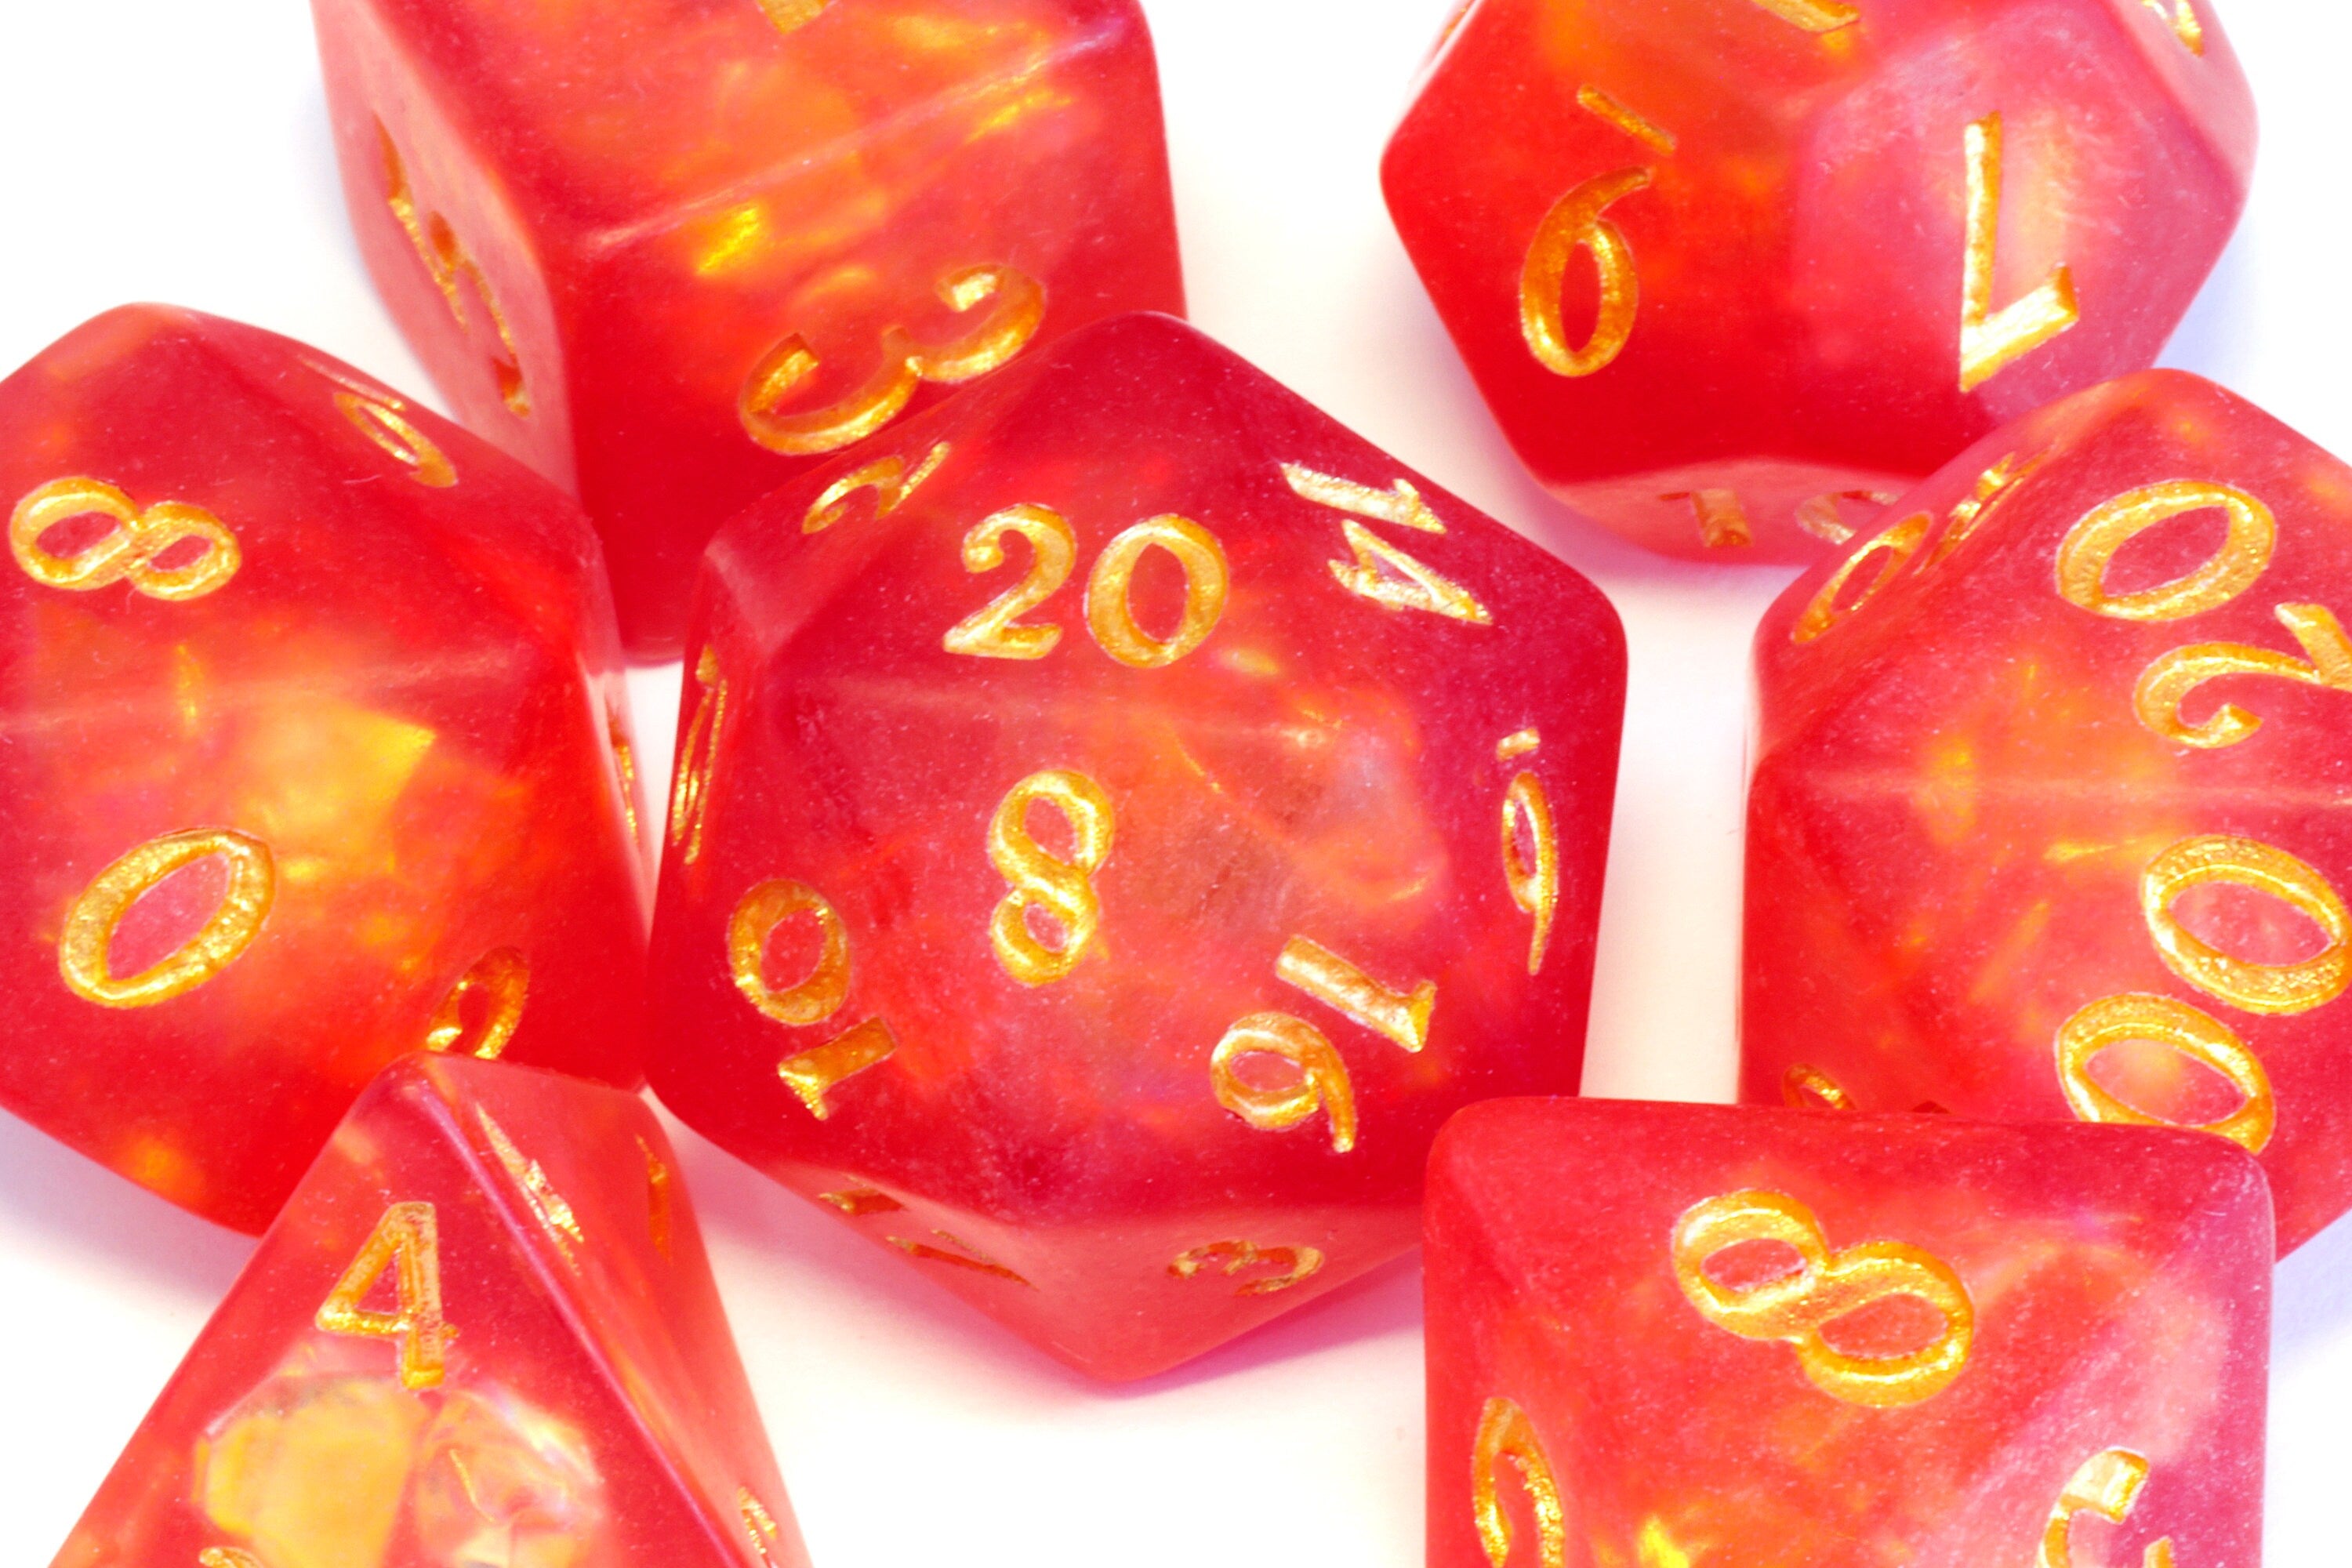 Dragon's Breath dice set - Red orange Holographic inclusions , Frosted